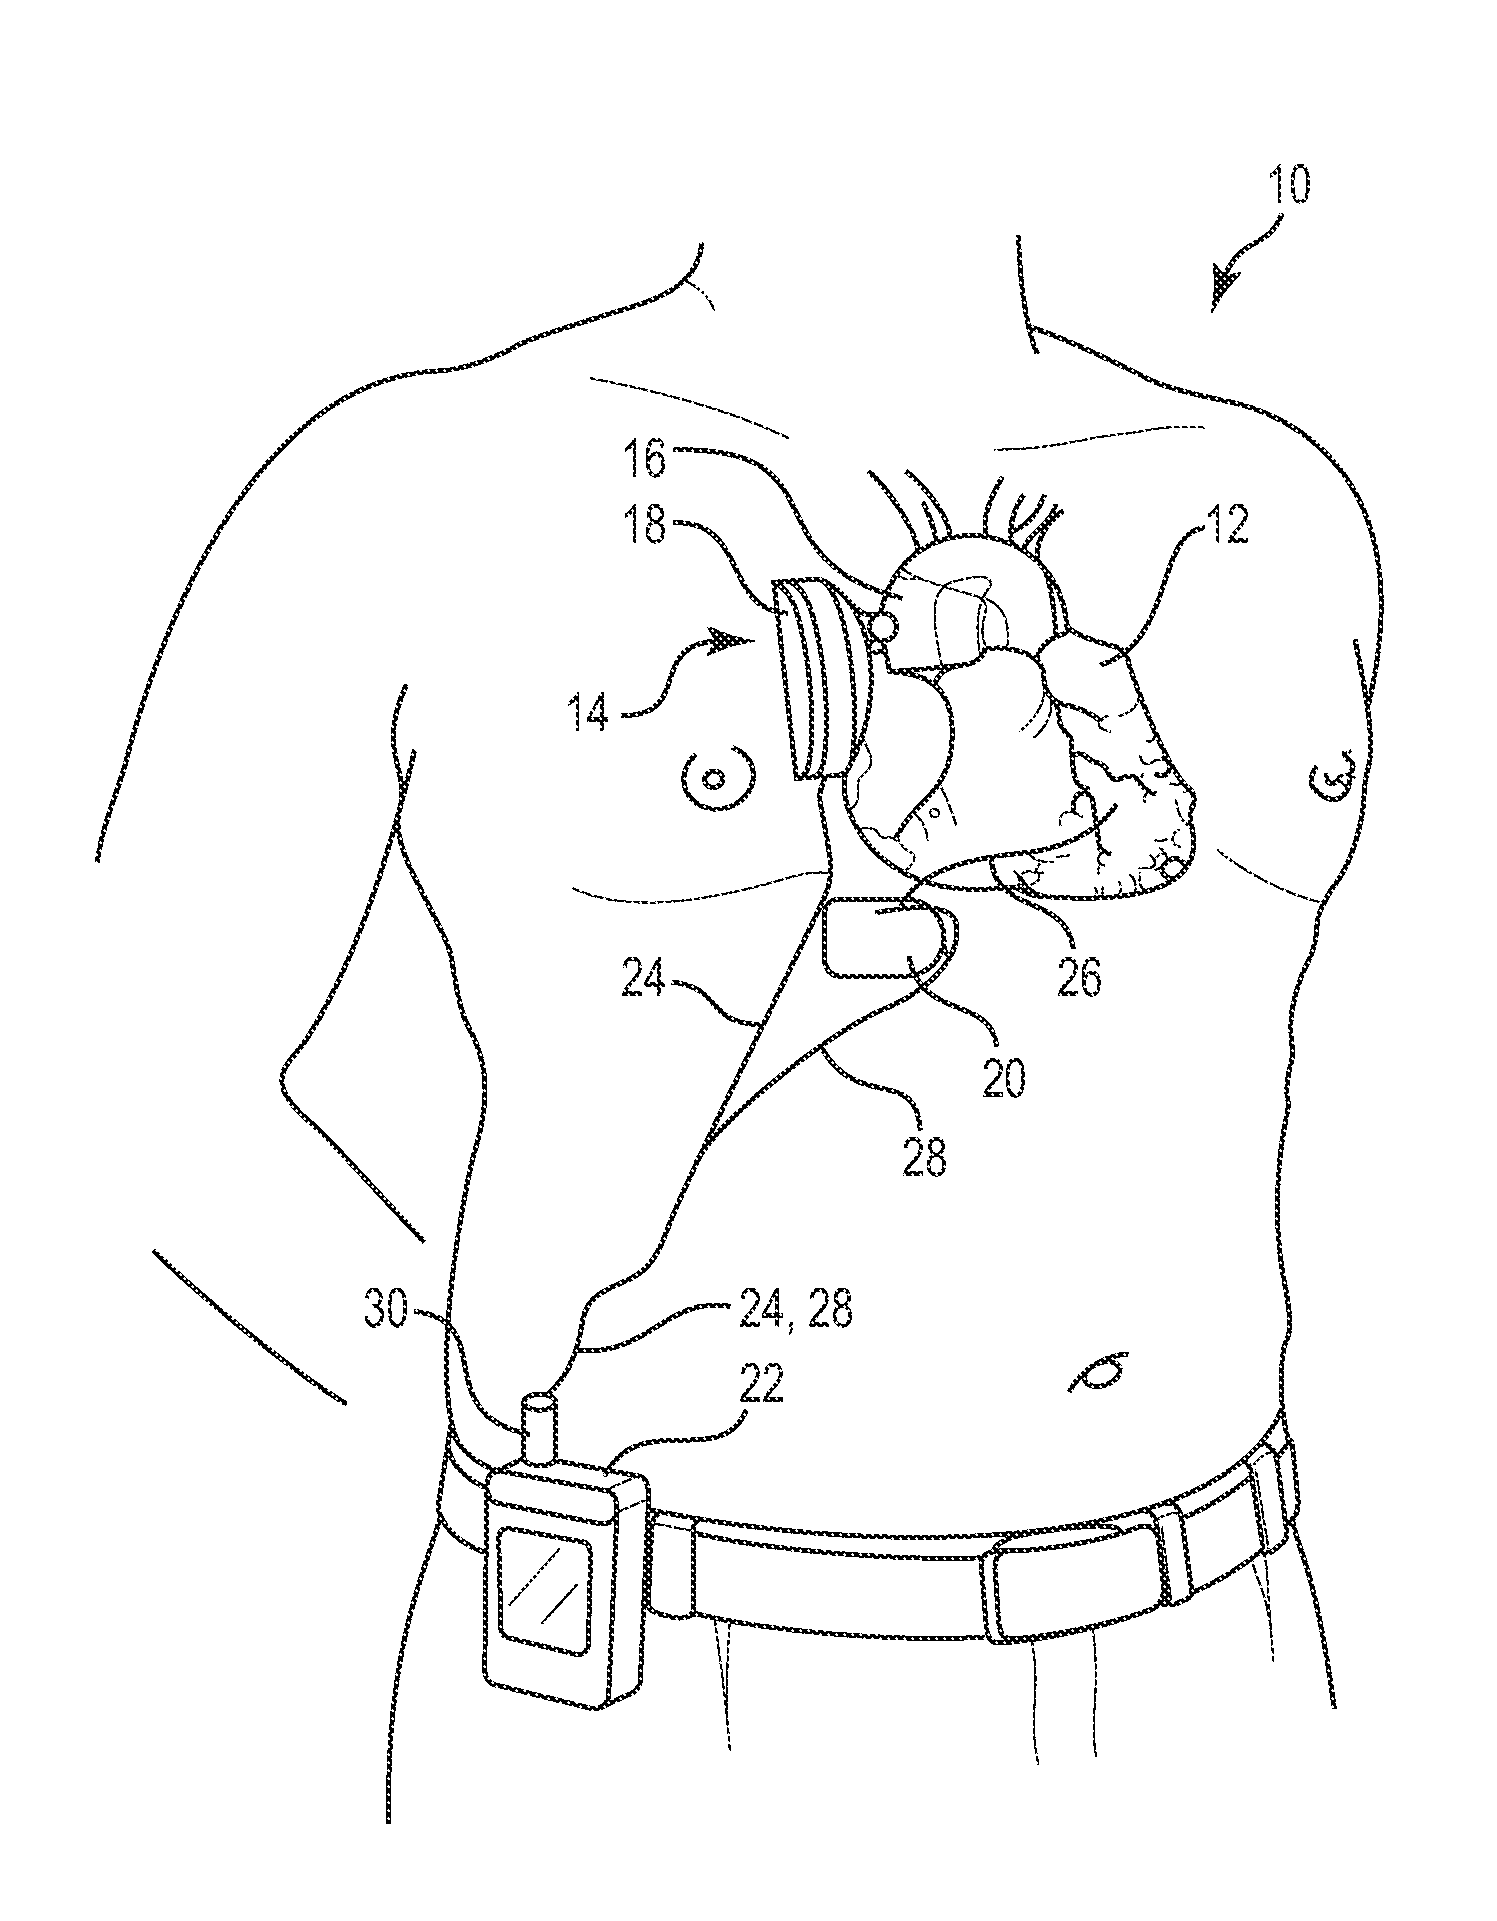 Combination Heart Assist Systems, Methods, and Devices